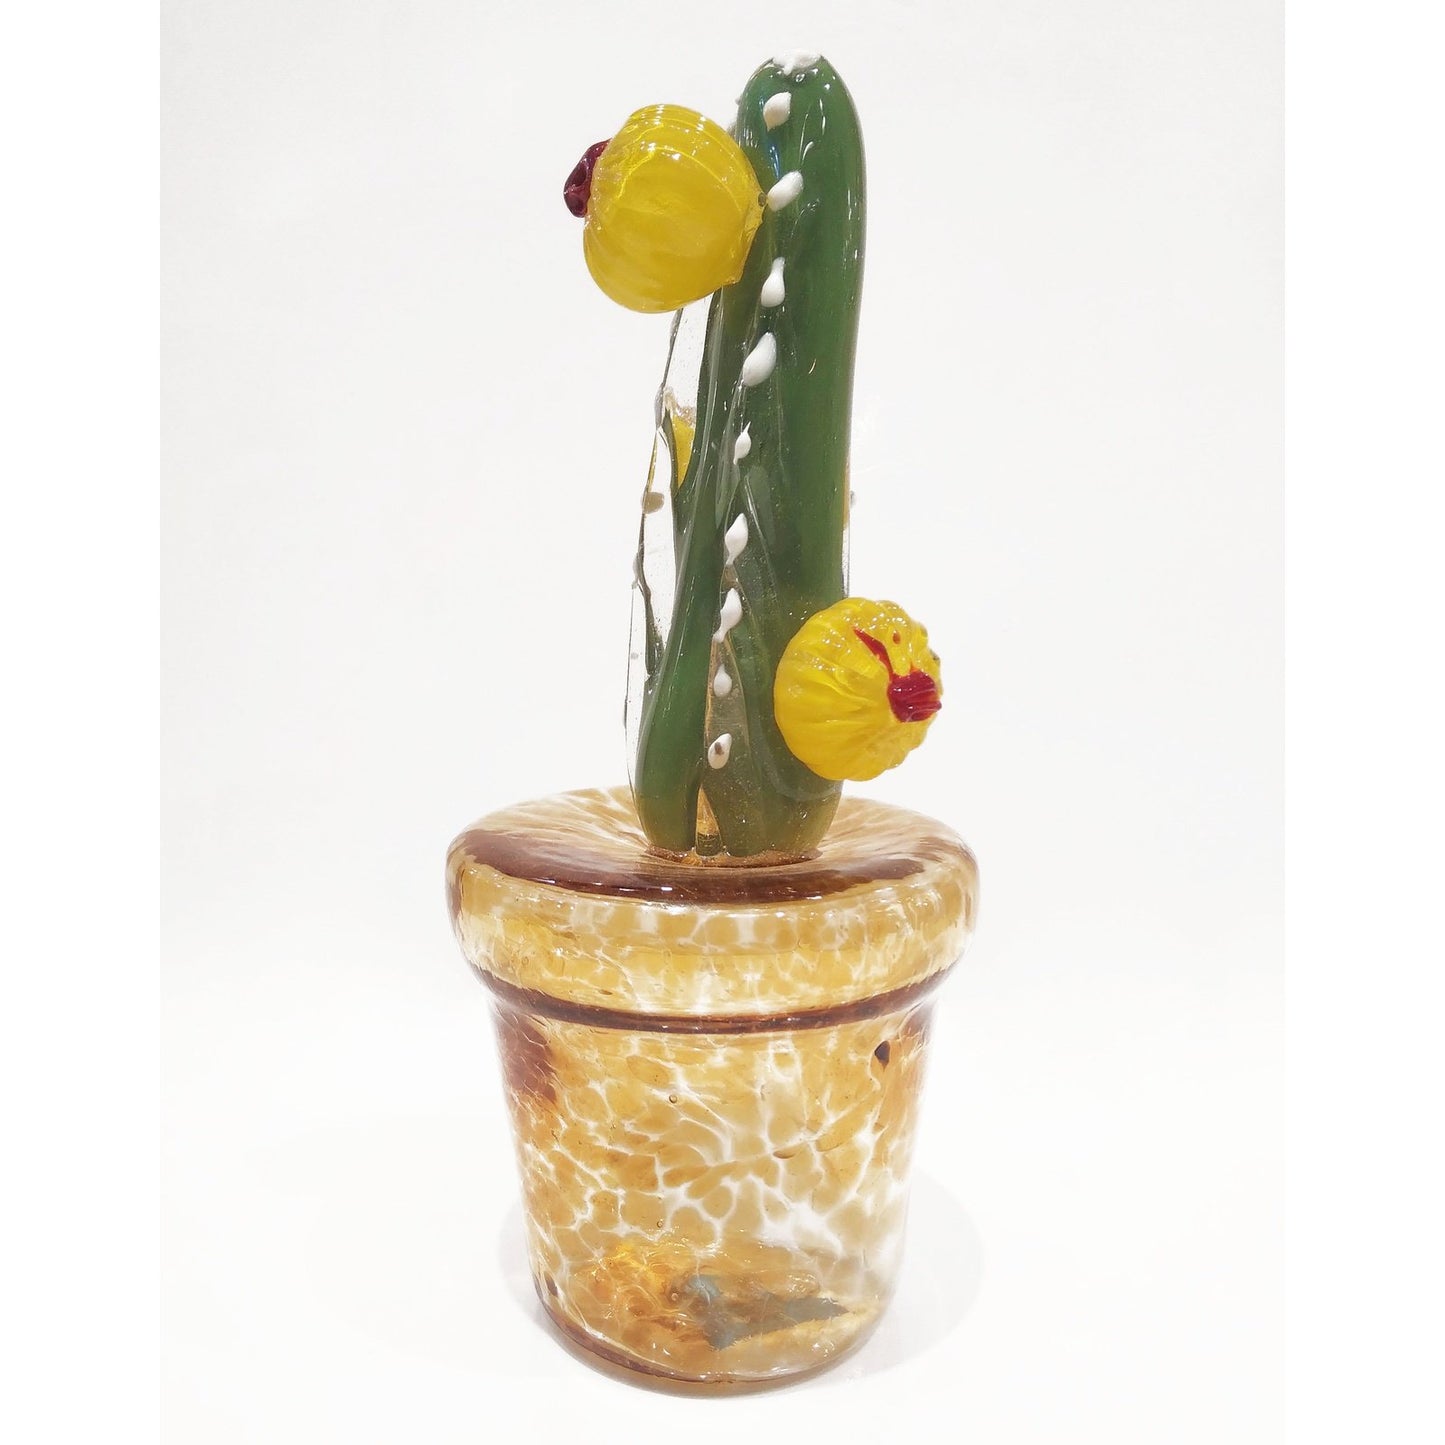 2000s Italian Green Murano Glass Cactus Plant with Yellow Flowers in Gold Pot